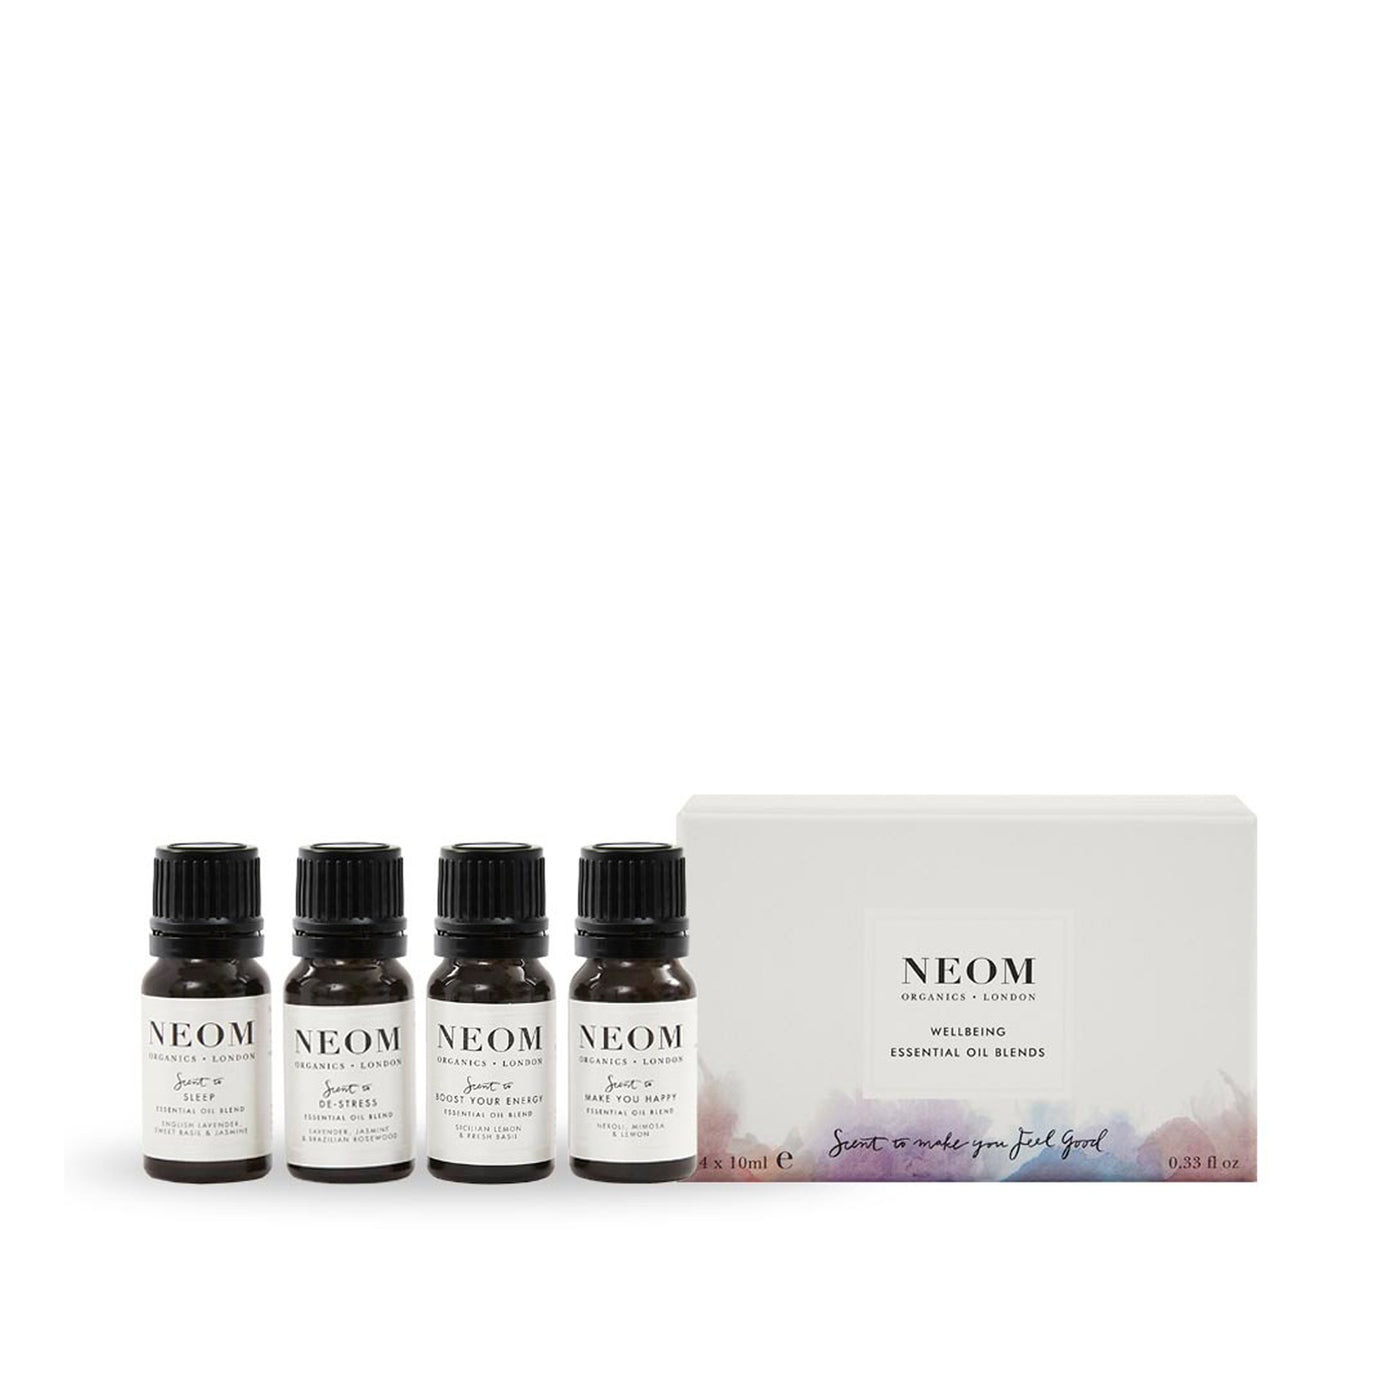 NEOM Organics - Wellbeing Essential Oil Blends Collection RRP £80